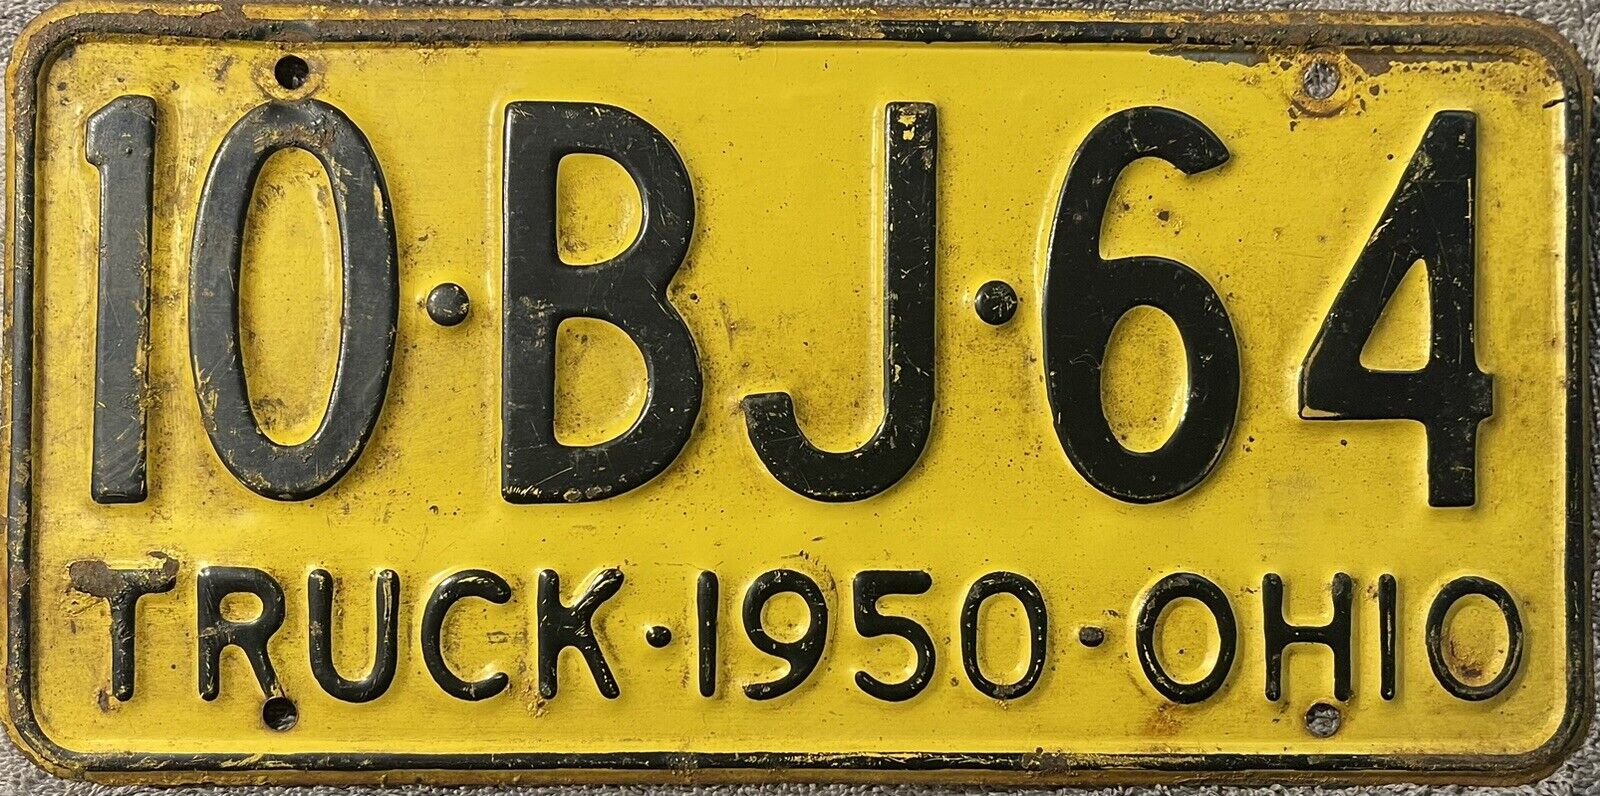 1950 Ohio Truck License Plate Tag All Original Paint 10•BJ•64 DMV CLEAR OH